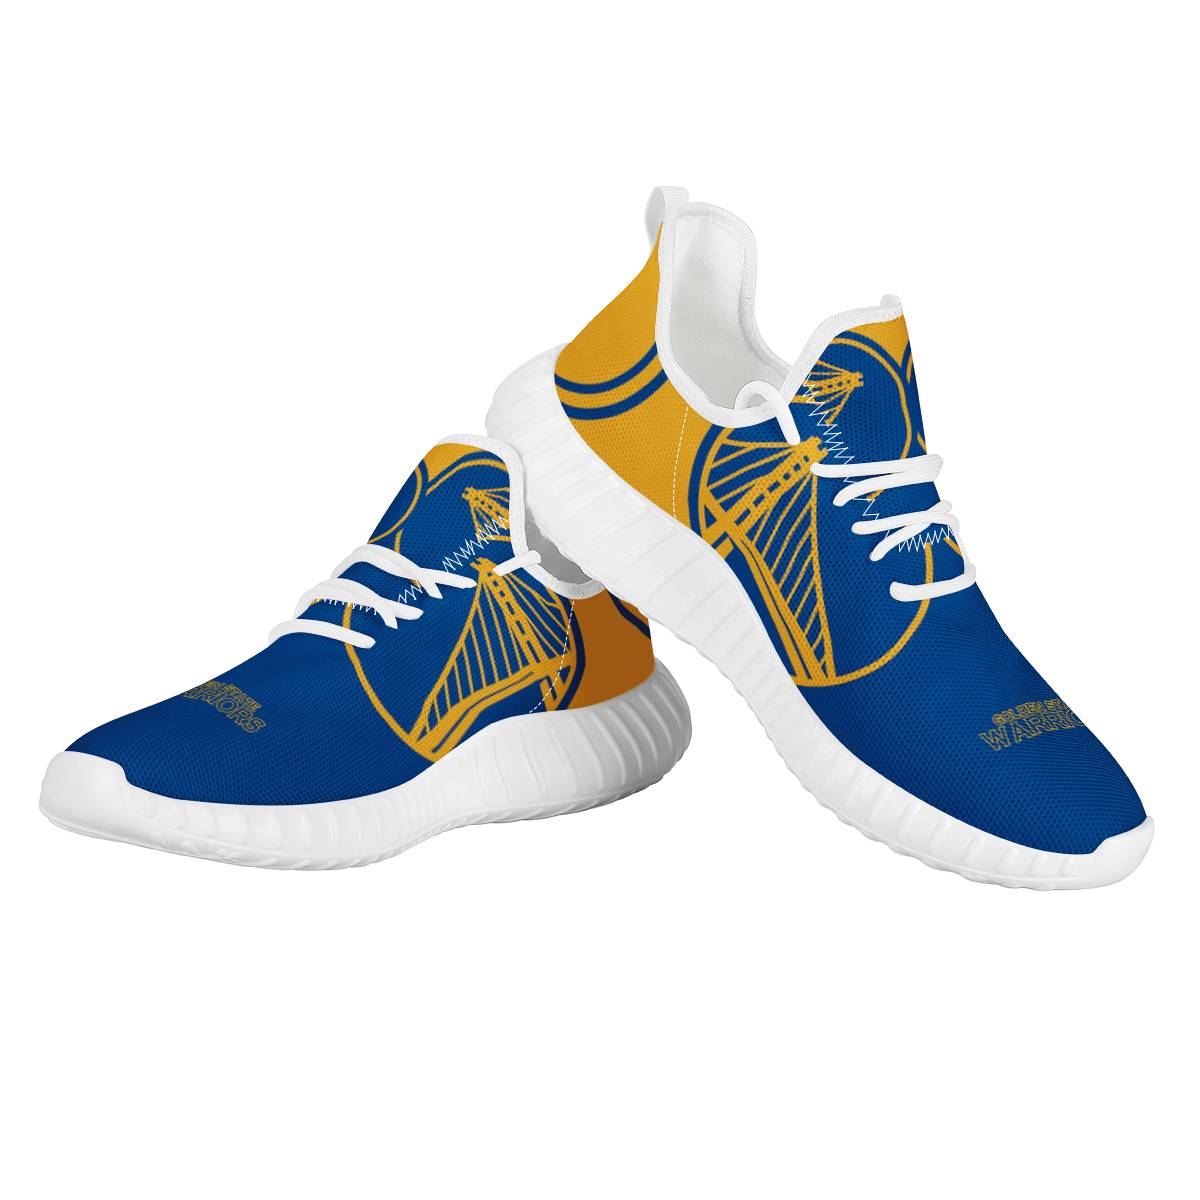 Men's Golden State Warriors Mesh Knit Sneakers/Shoes 003